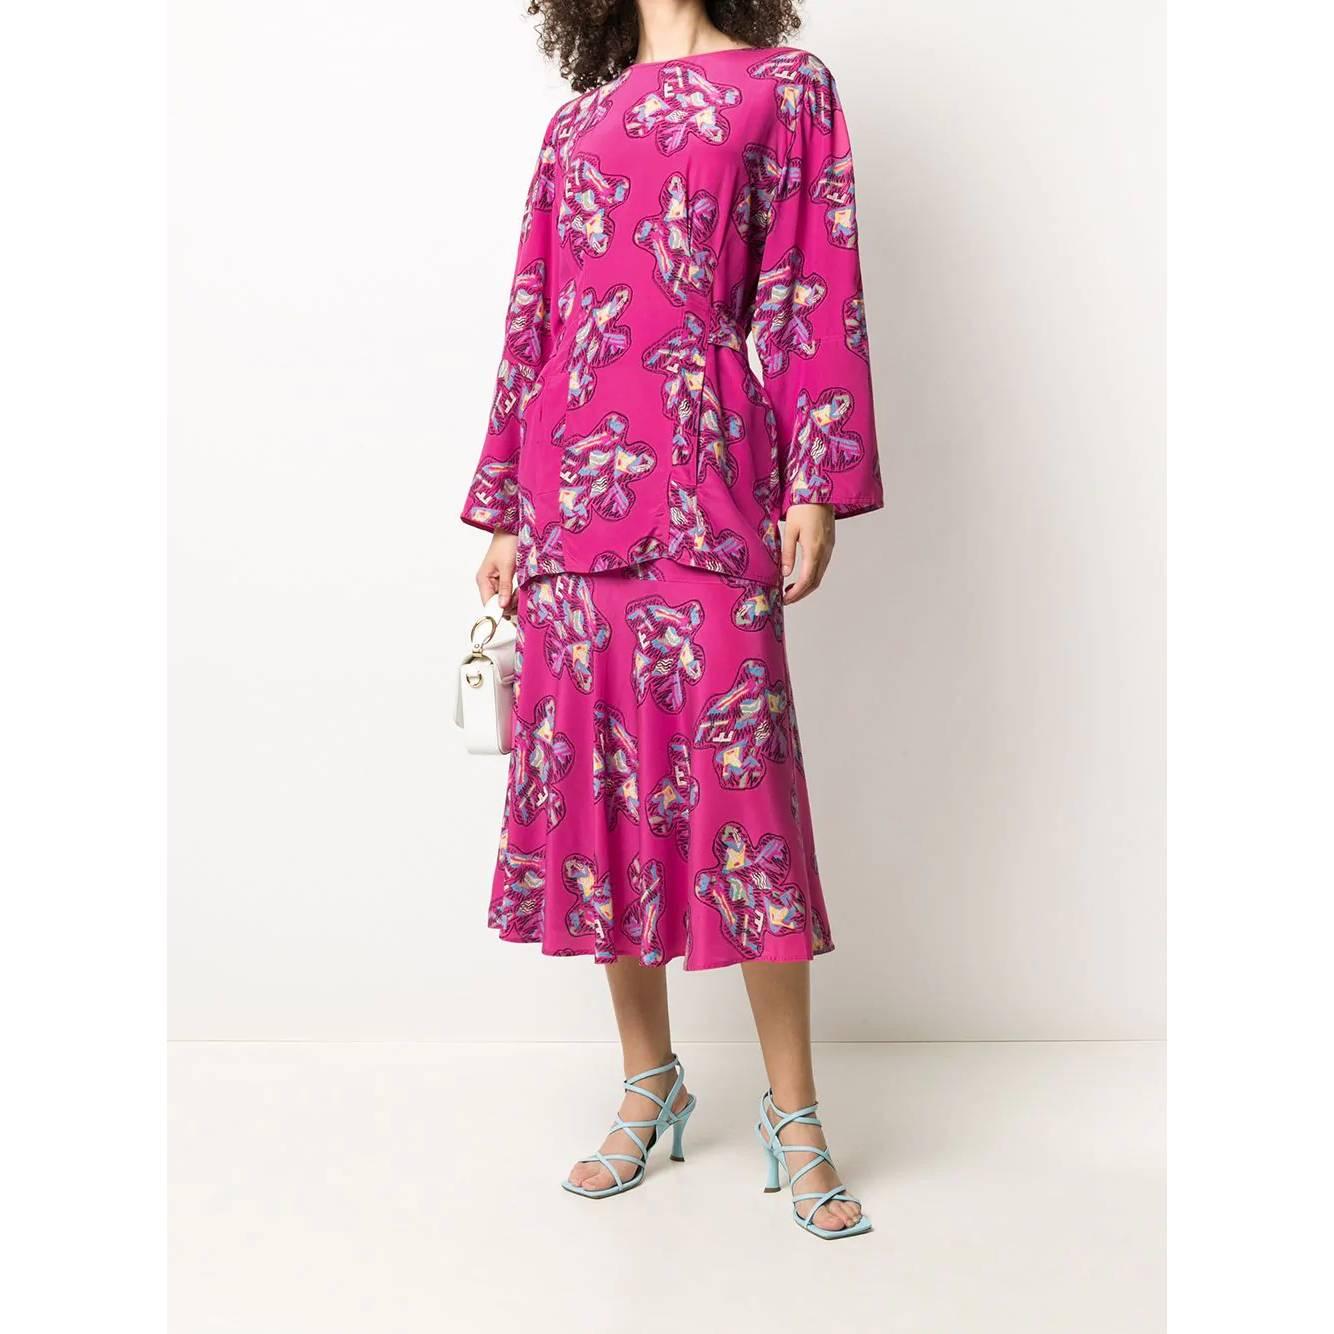 A.N.G.E.L.O. Vintage - Italy
Fendi fuchsia silk with floral pattern suit. Round neck blouse, English buttoning on the back and martingale. A-line midi skirt with high waist and side zip and button closure.

Years: 70s

Made in Italy

Size: 38